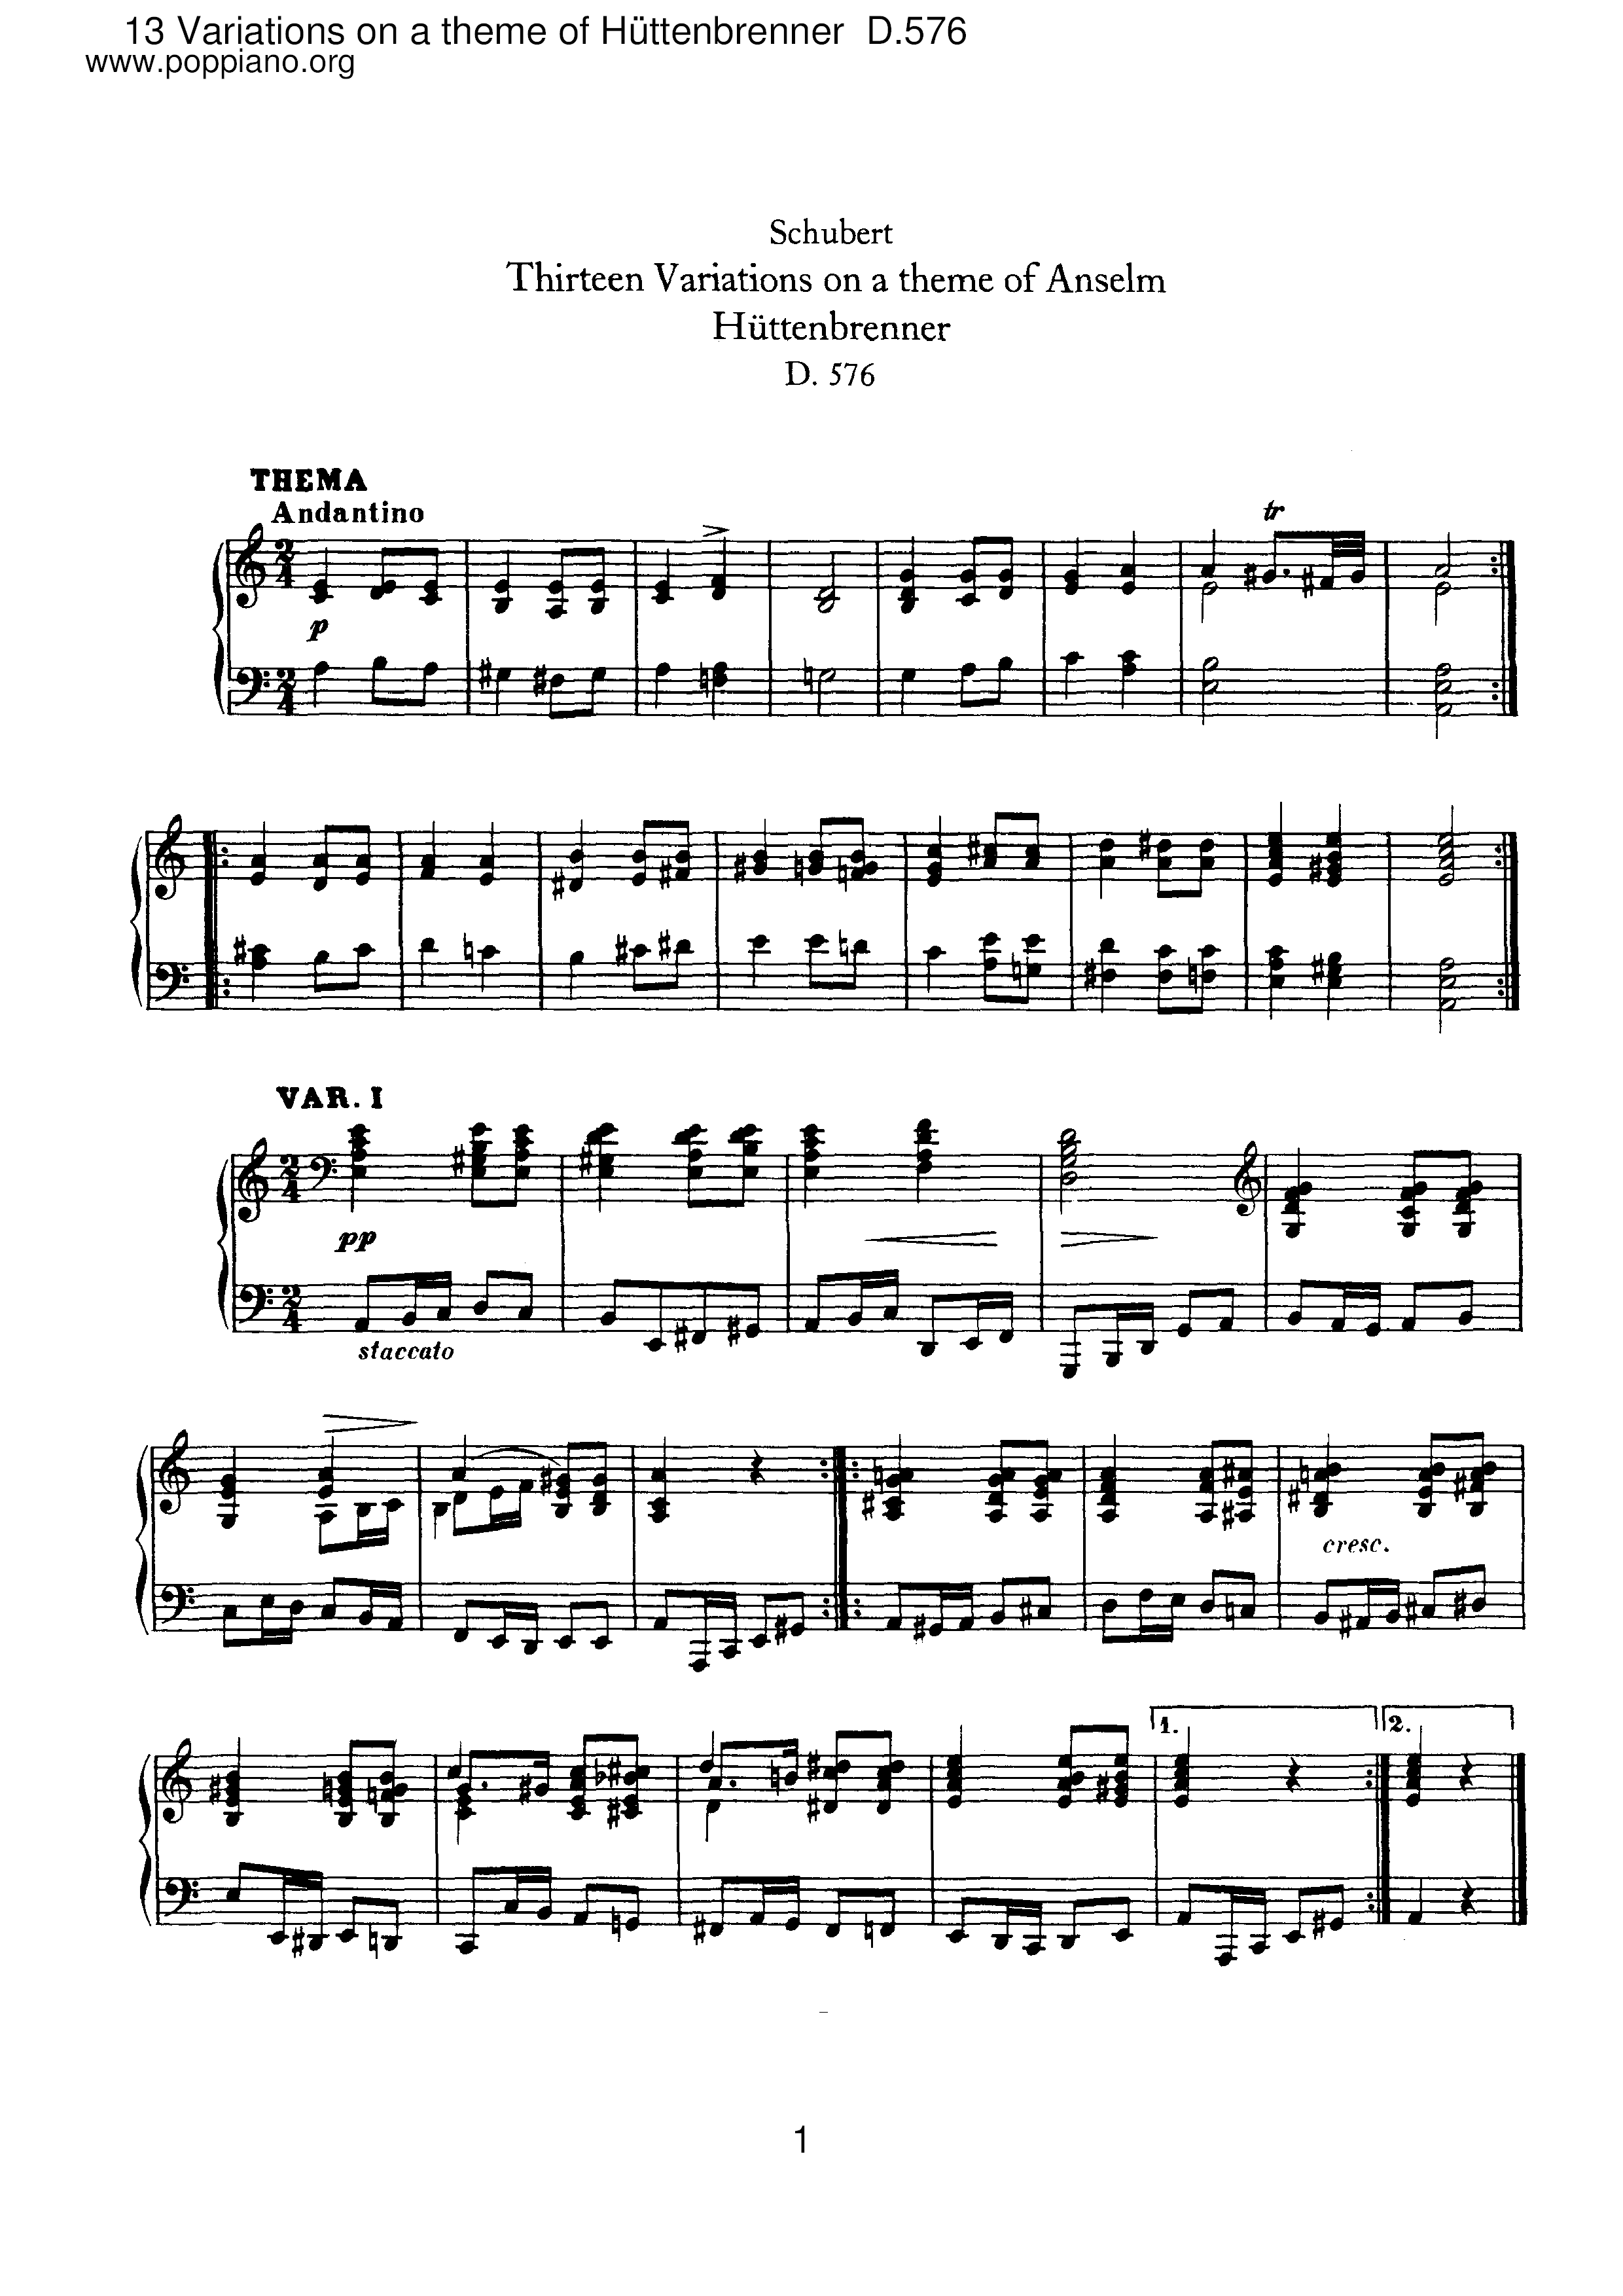 13 Variations on a Theme of Huttenbrennet, D.576琴谱